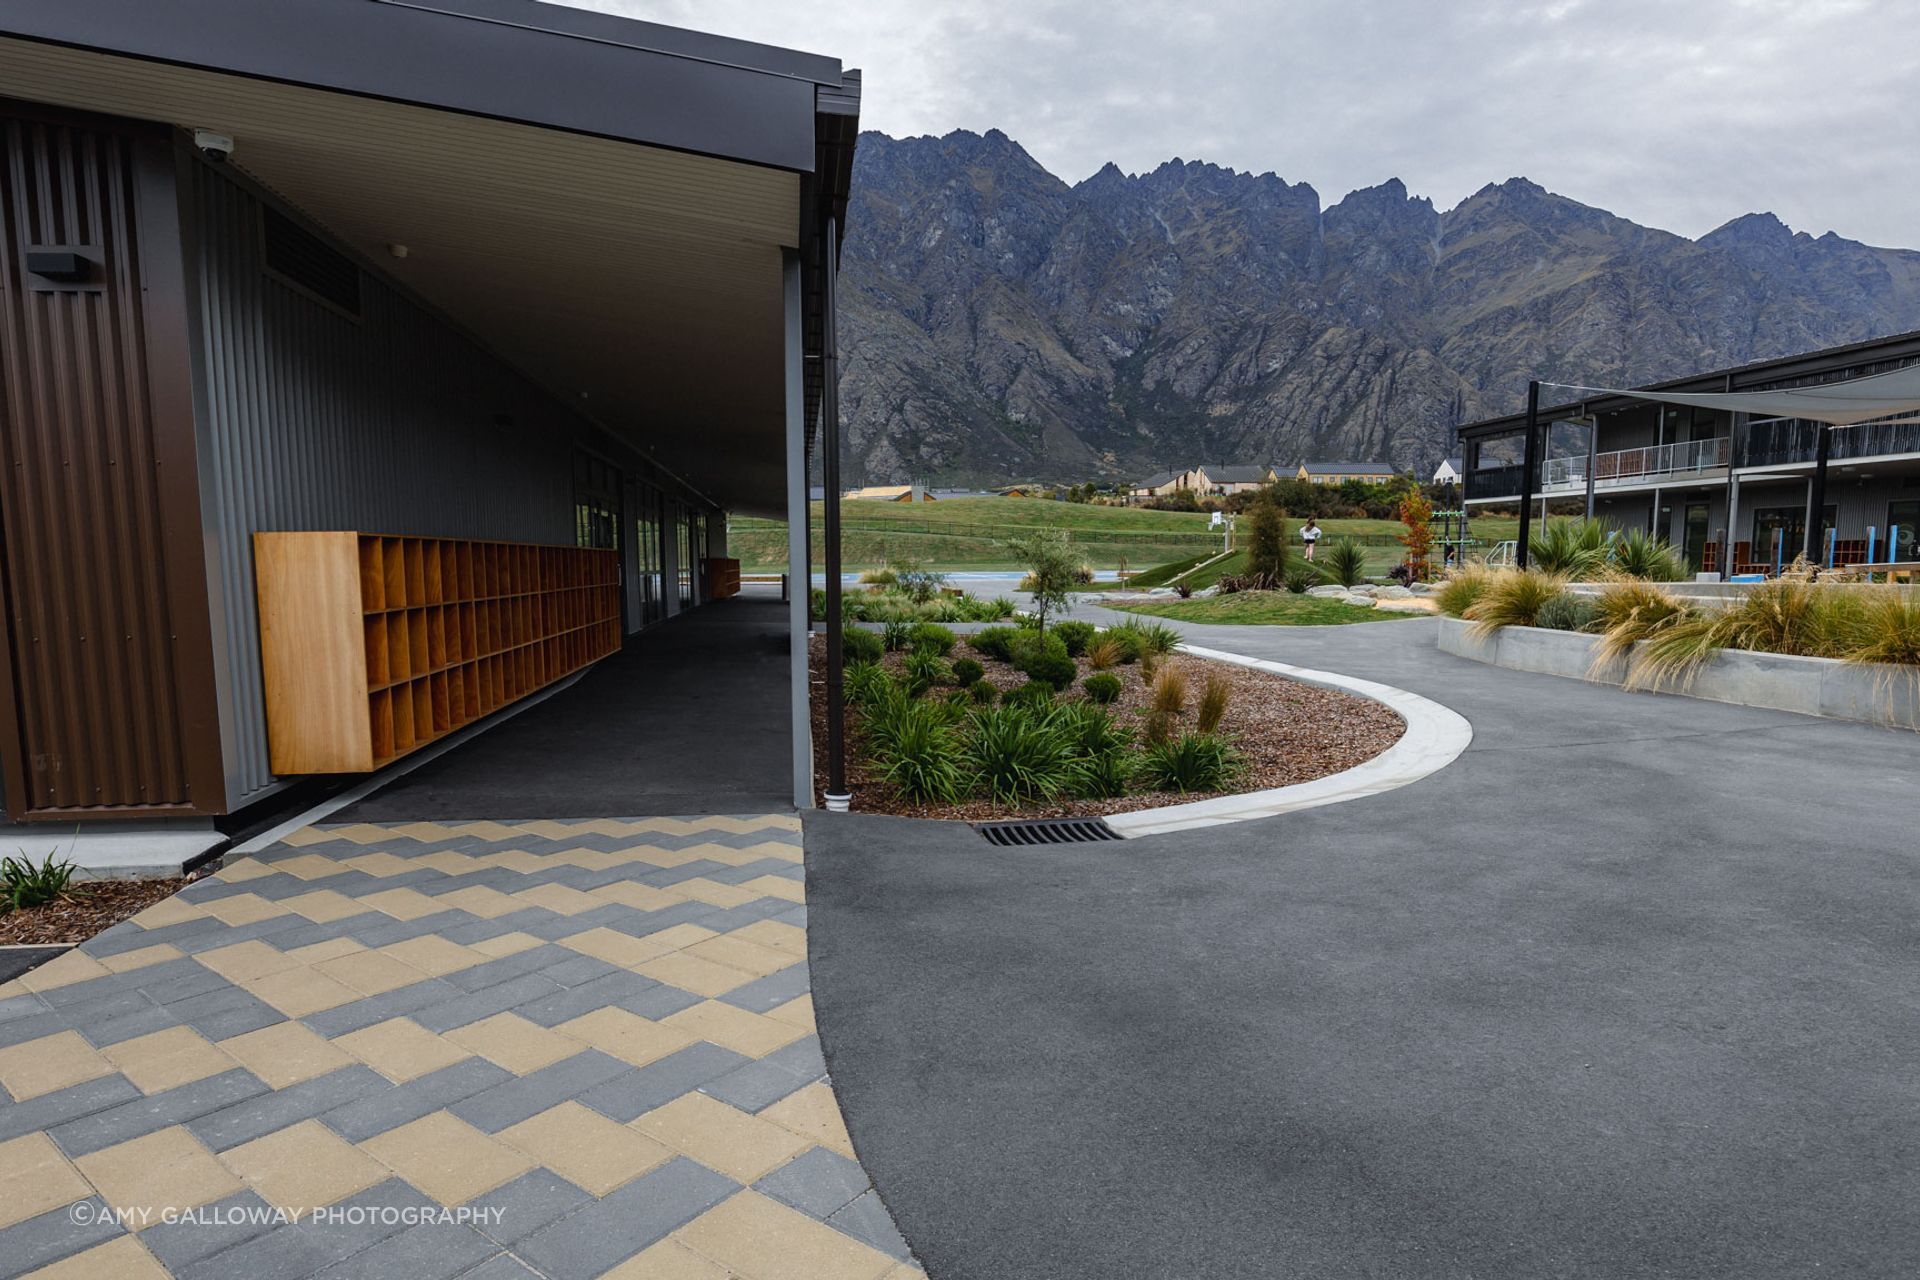 Paving, planting, and tall timber Pou have been used as wayfinding elements.